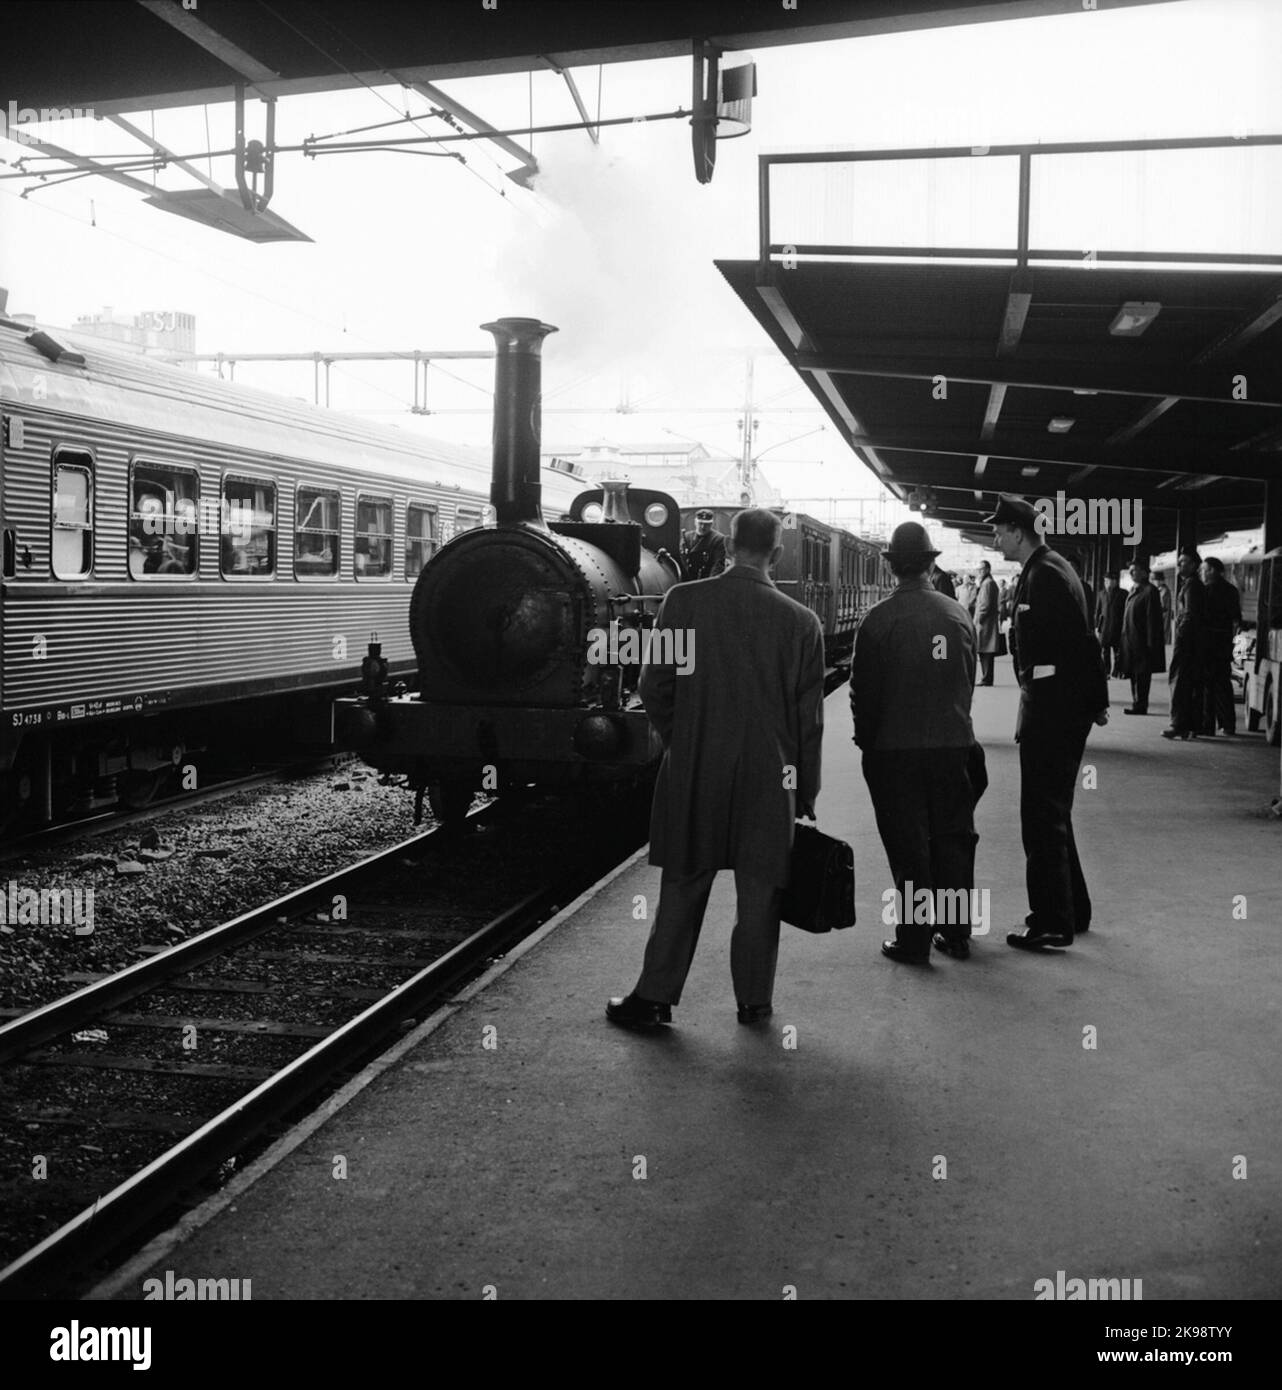 Historical train's journey from Stockholm to Gothenburg for the inauguration of train 62. The picture shows LOK number 3 'Prince August', later the State Railways SJ BB 43. Köping Hults Railway KHJ CD 13. The State Railway SJ C 182. State Railway SJ AB 289. State Railway SJ A 103. Also Consolid State Rail SJ B 4738 is visible in the picture. Stock Photo